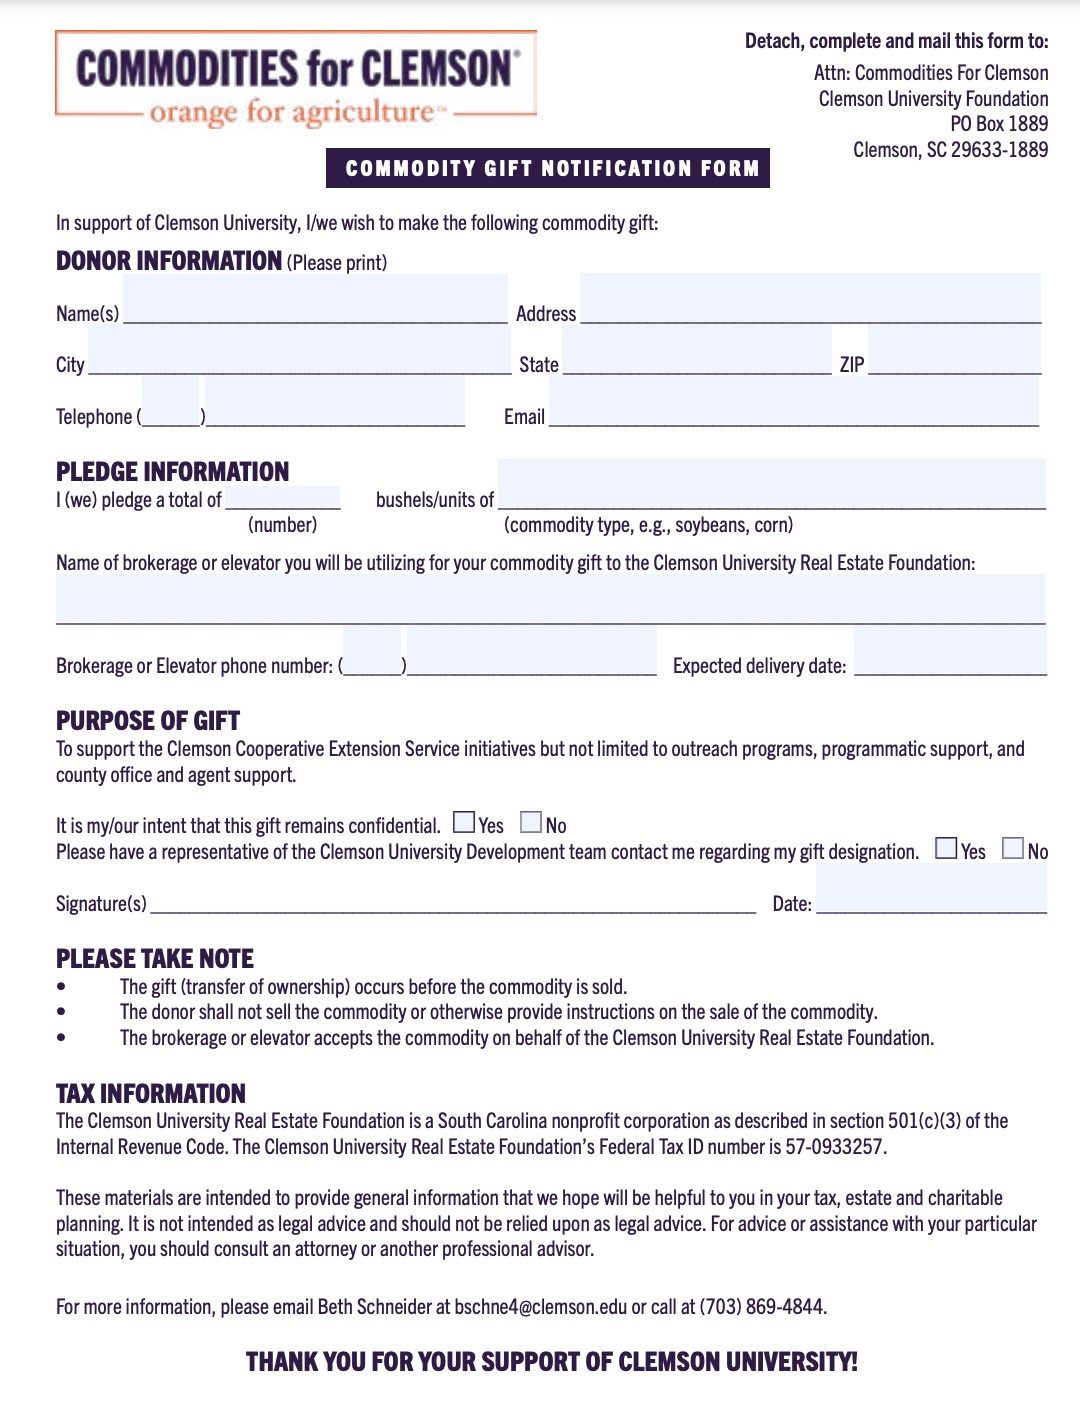 Commodity Gift Notification Form